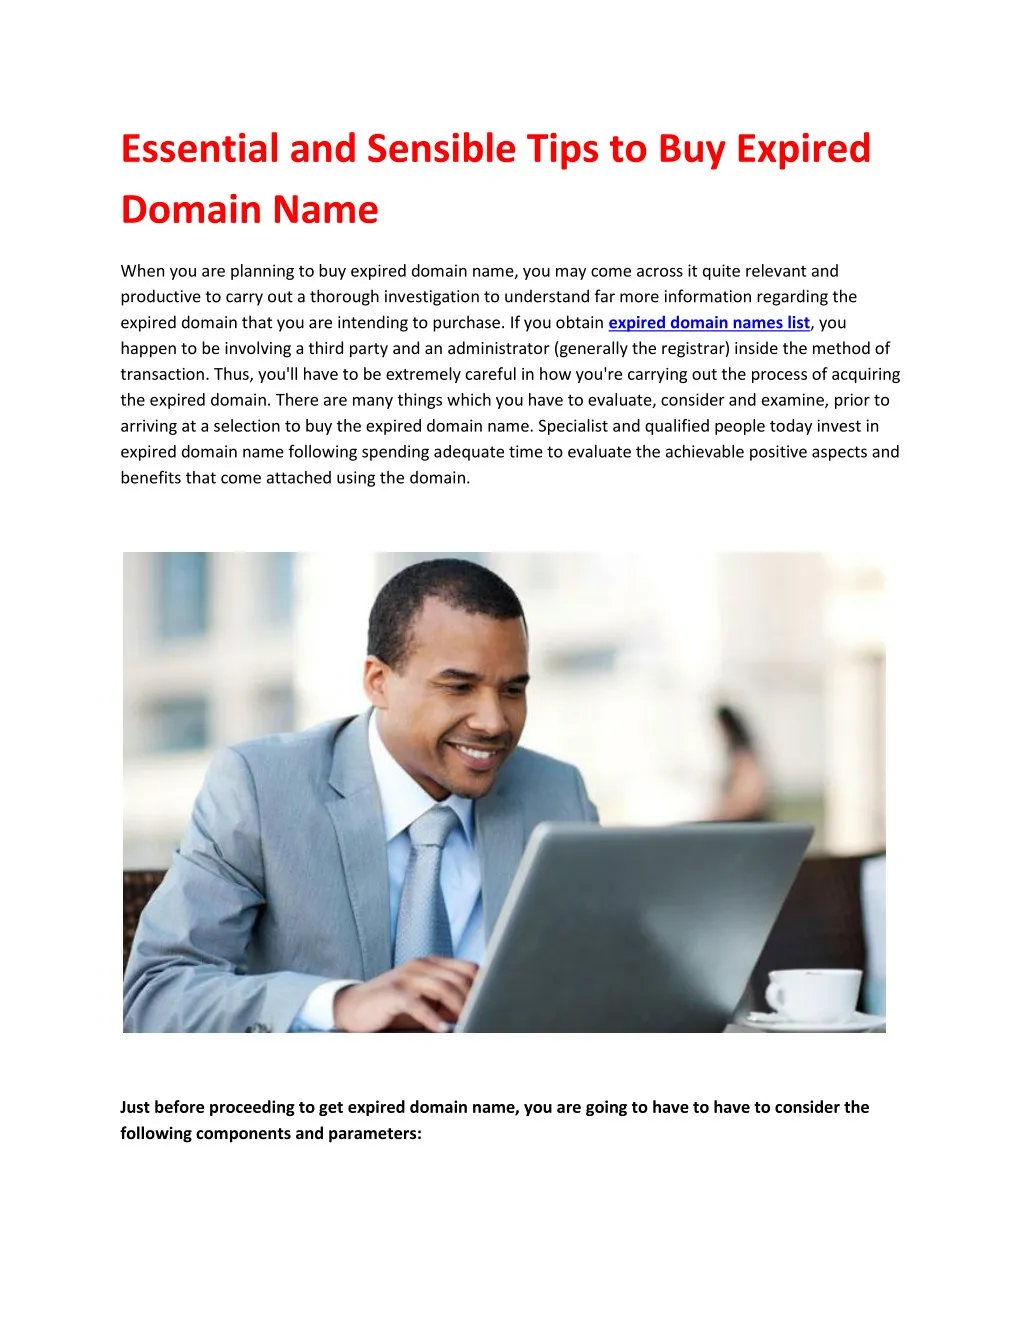 essential and sensible tips to buy expired domain